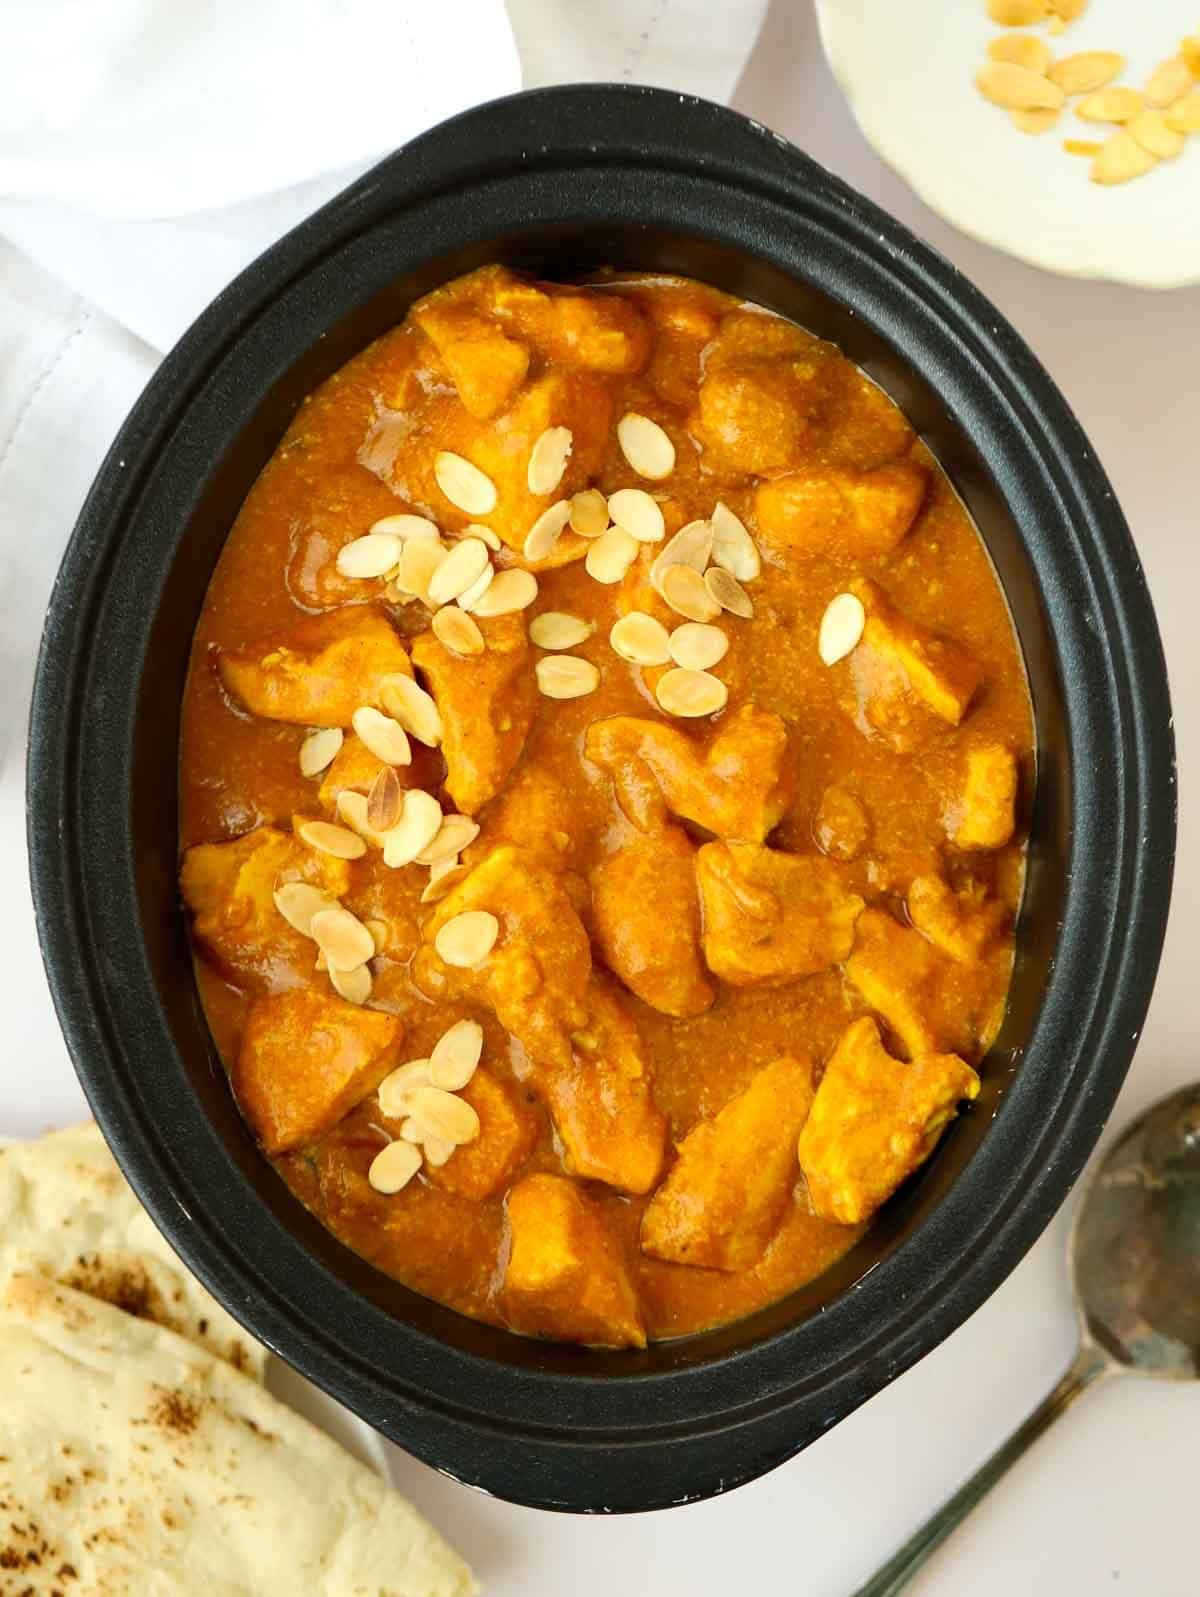 A slow cooker pot filled with cooked chicken korma, topped with almonds flakes and with naan breads on the side.